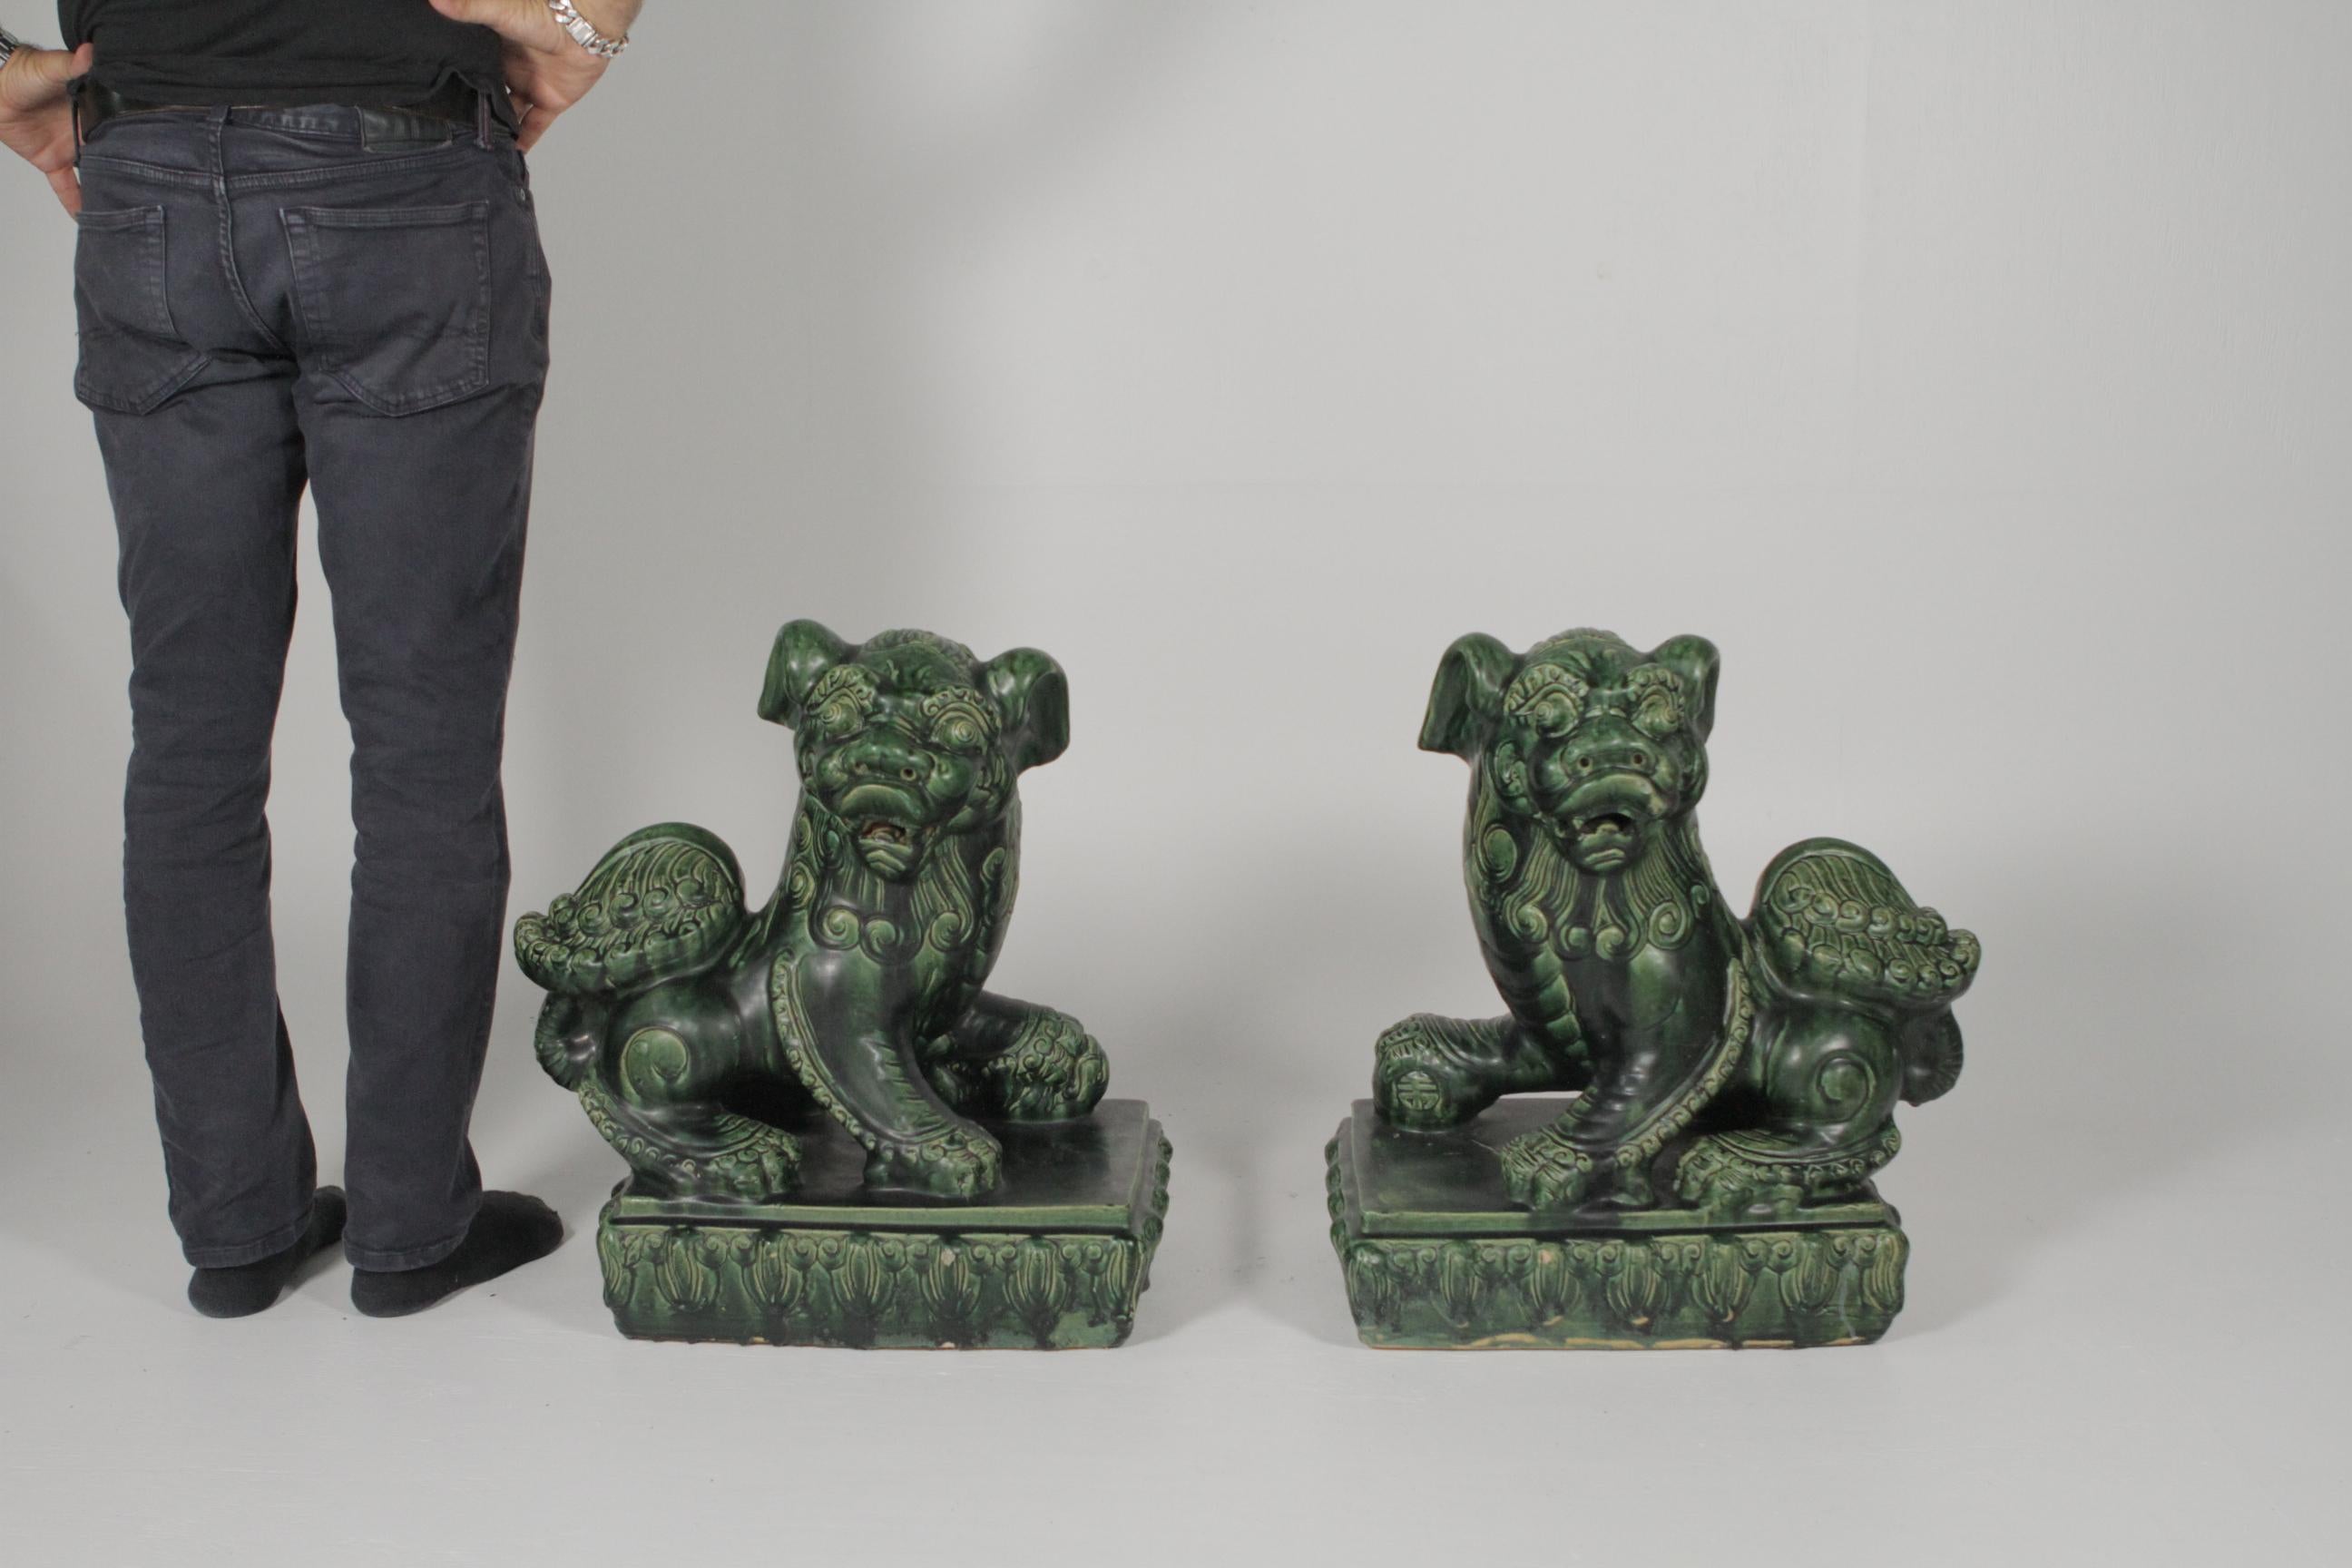 A large pair of 19th century green glazed foo dogs. The rare vibrant green glaze over heavy dense pottery, one is the male, the other female, a mirror image and true original pair.